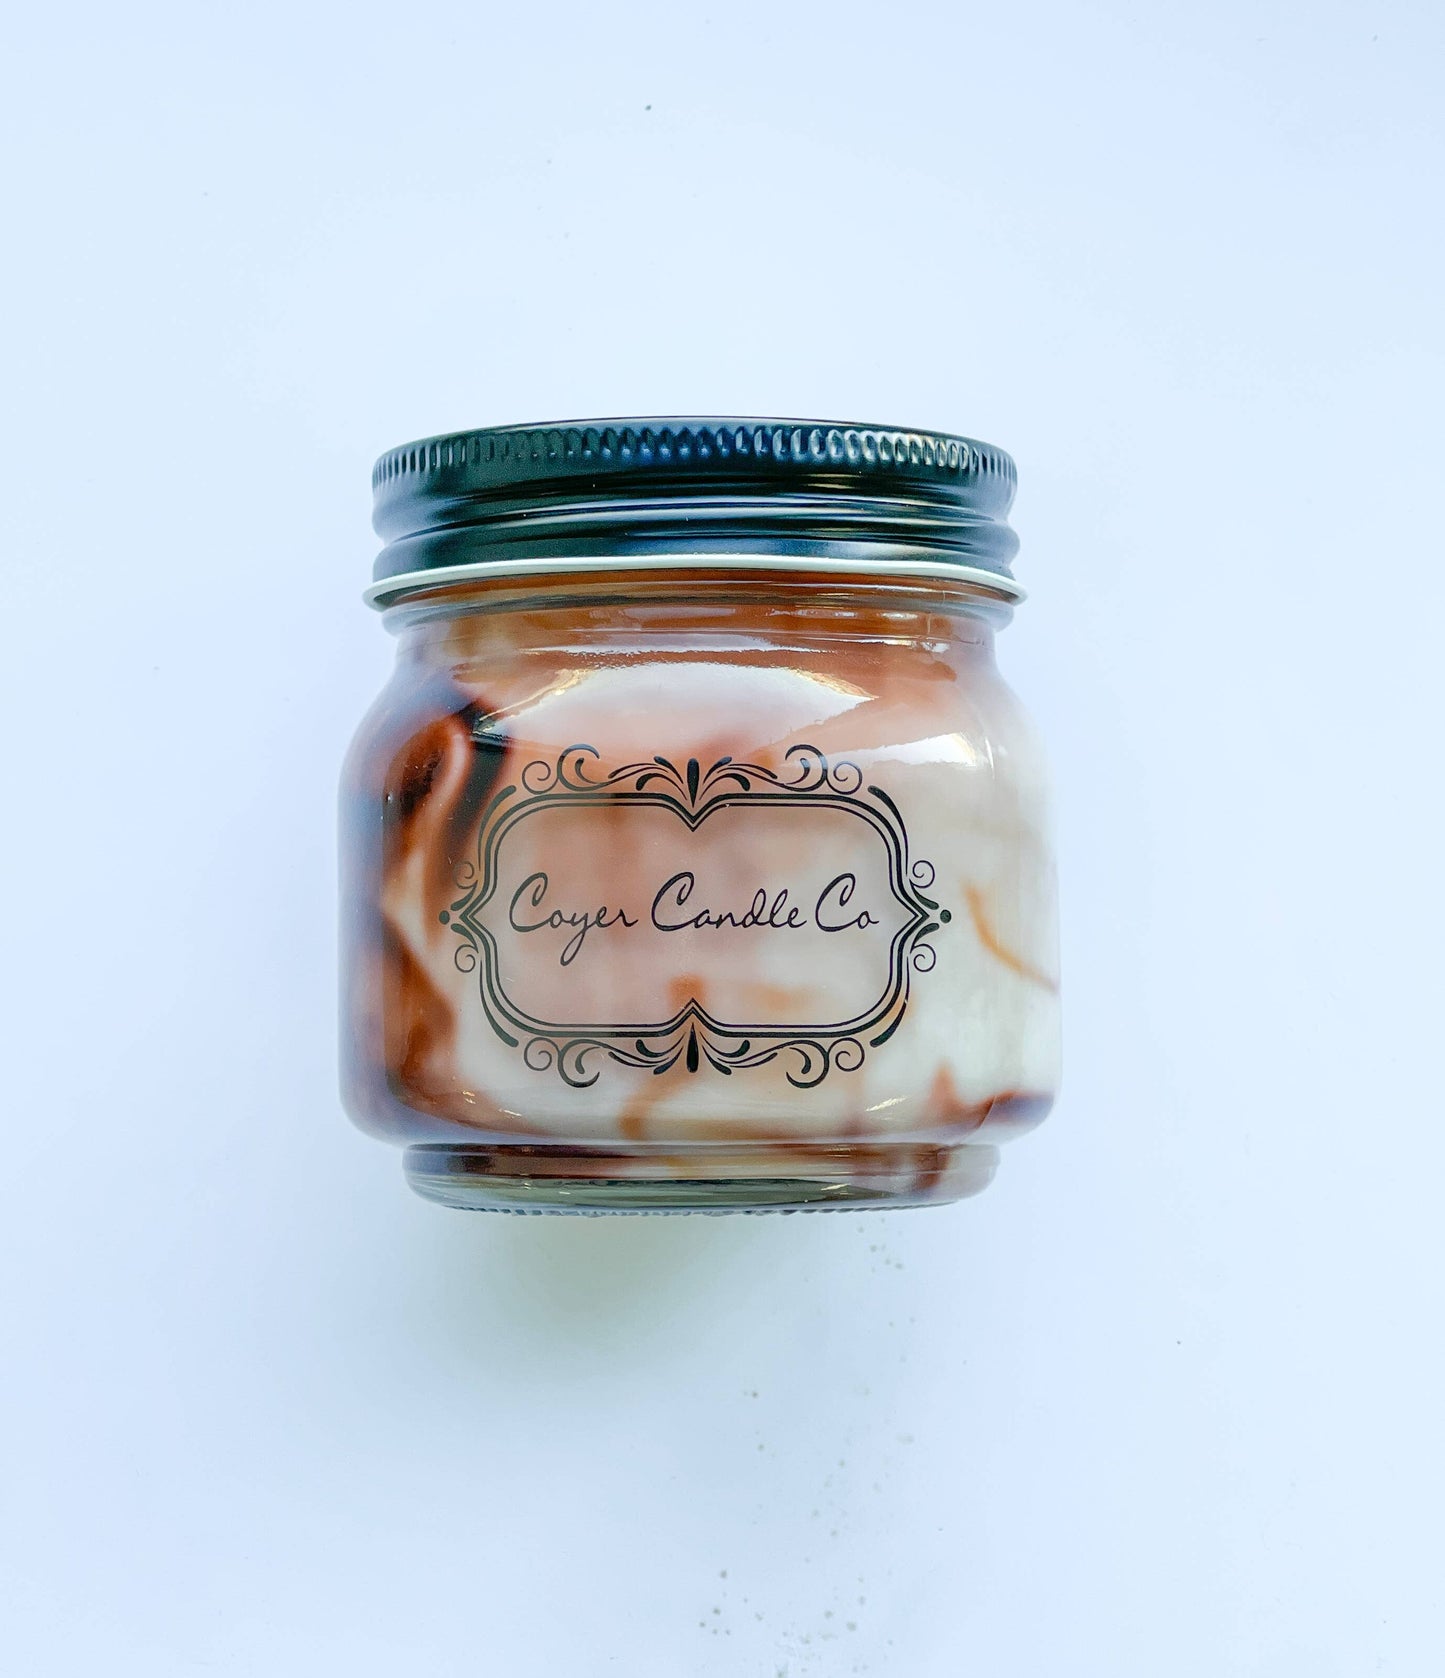 Coyer Candle Co. - 8 oz. Mason Jar Candles - Signature Collection: Pecans 'n Maple Syrup